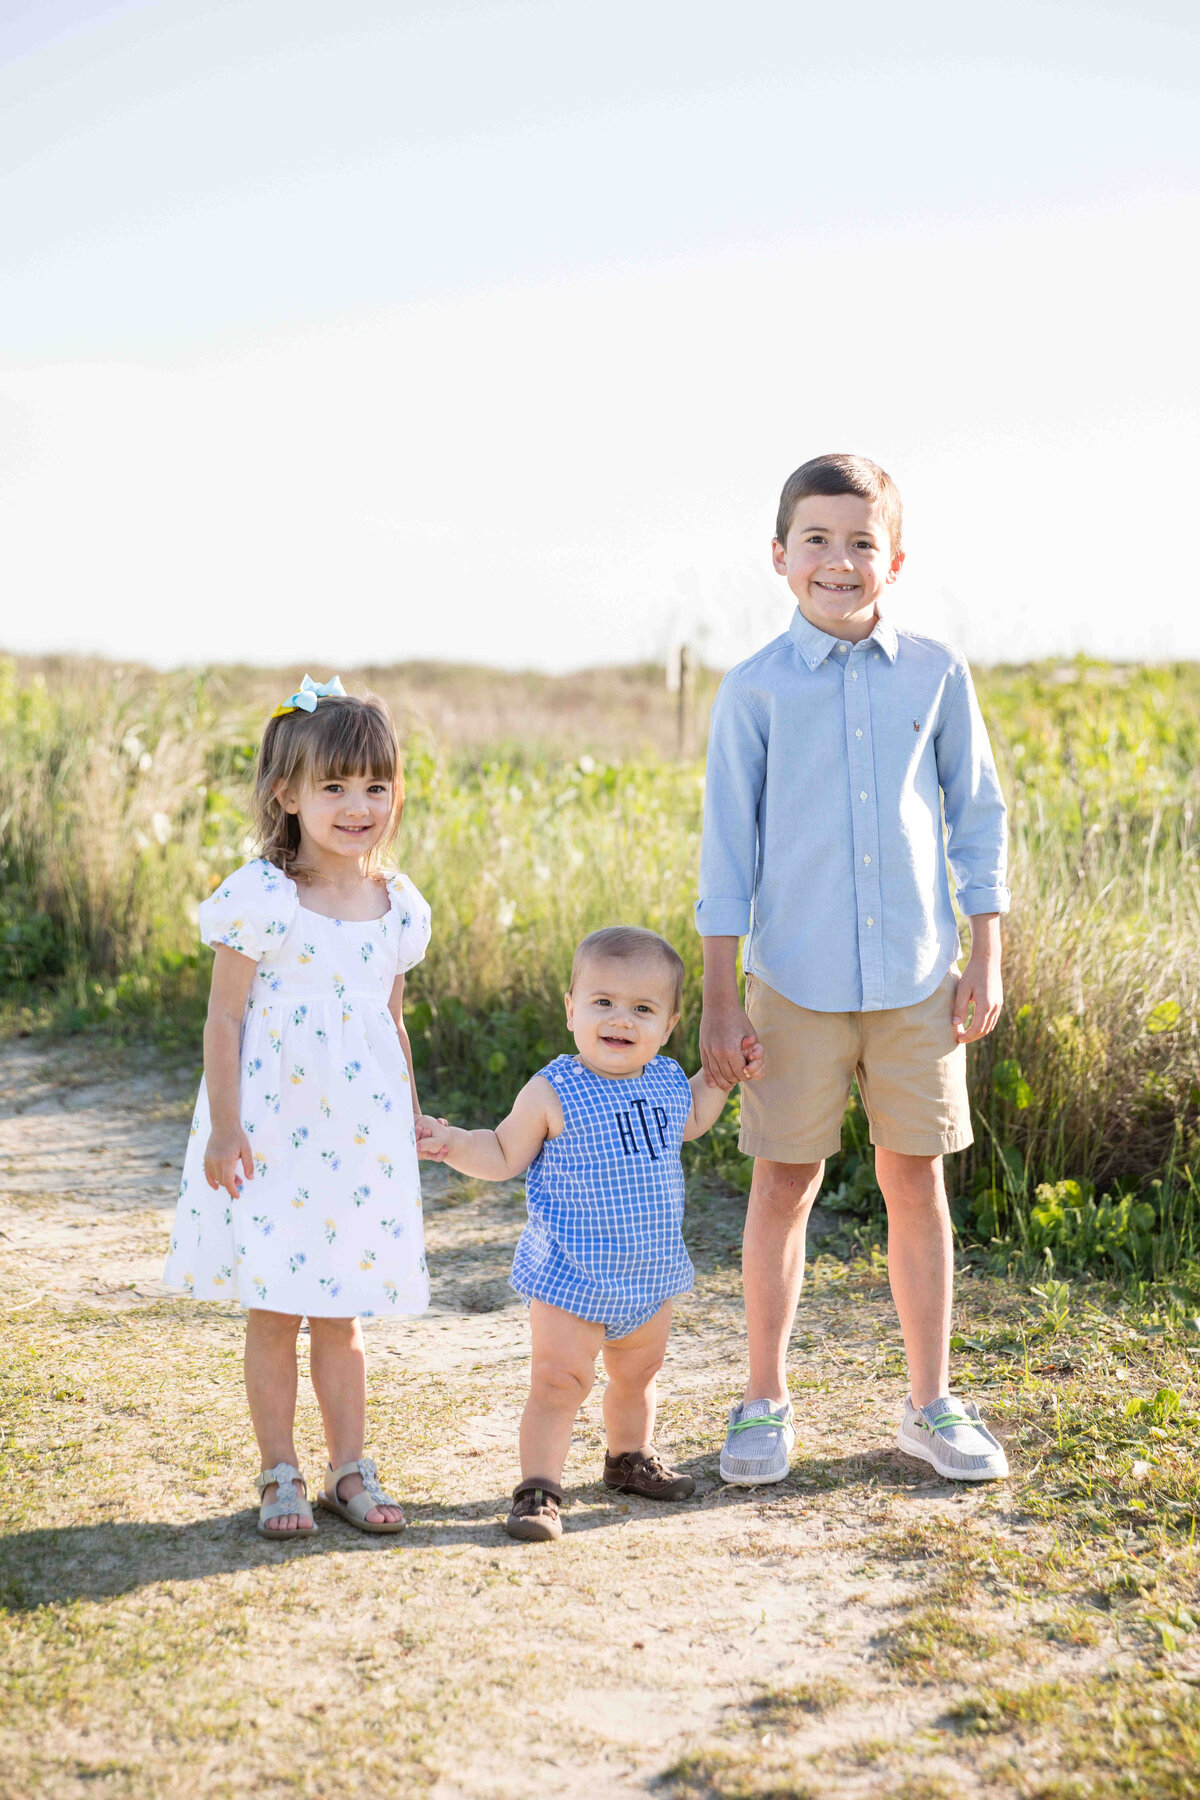 Traber_FamilySession_KobyBrownPhotography001